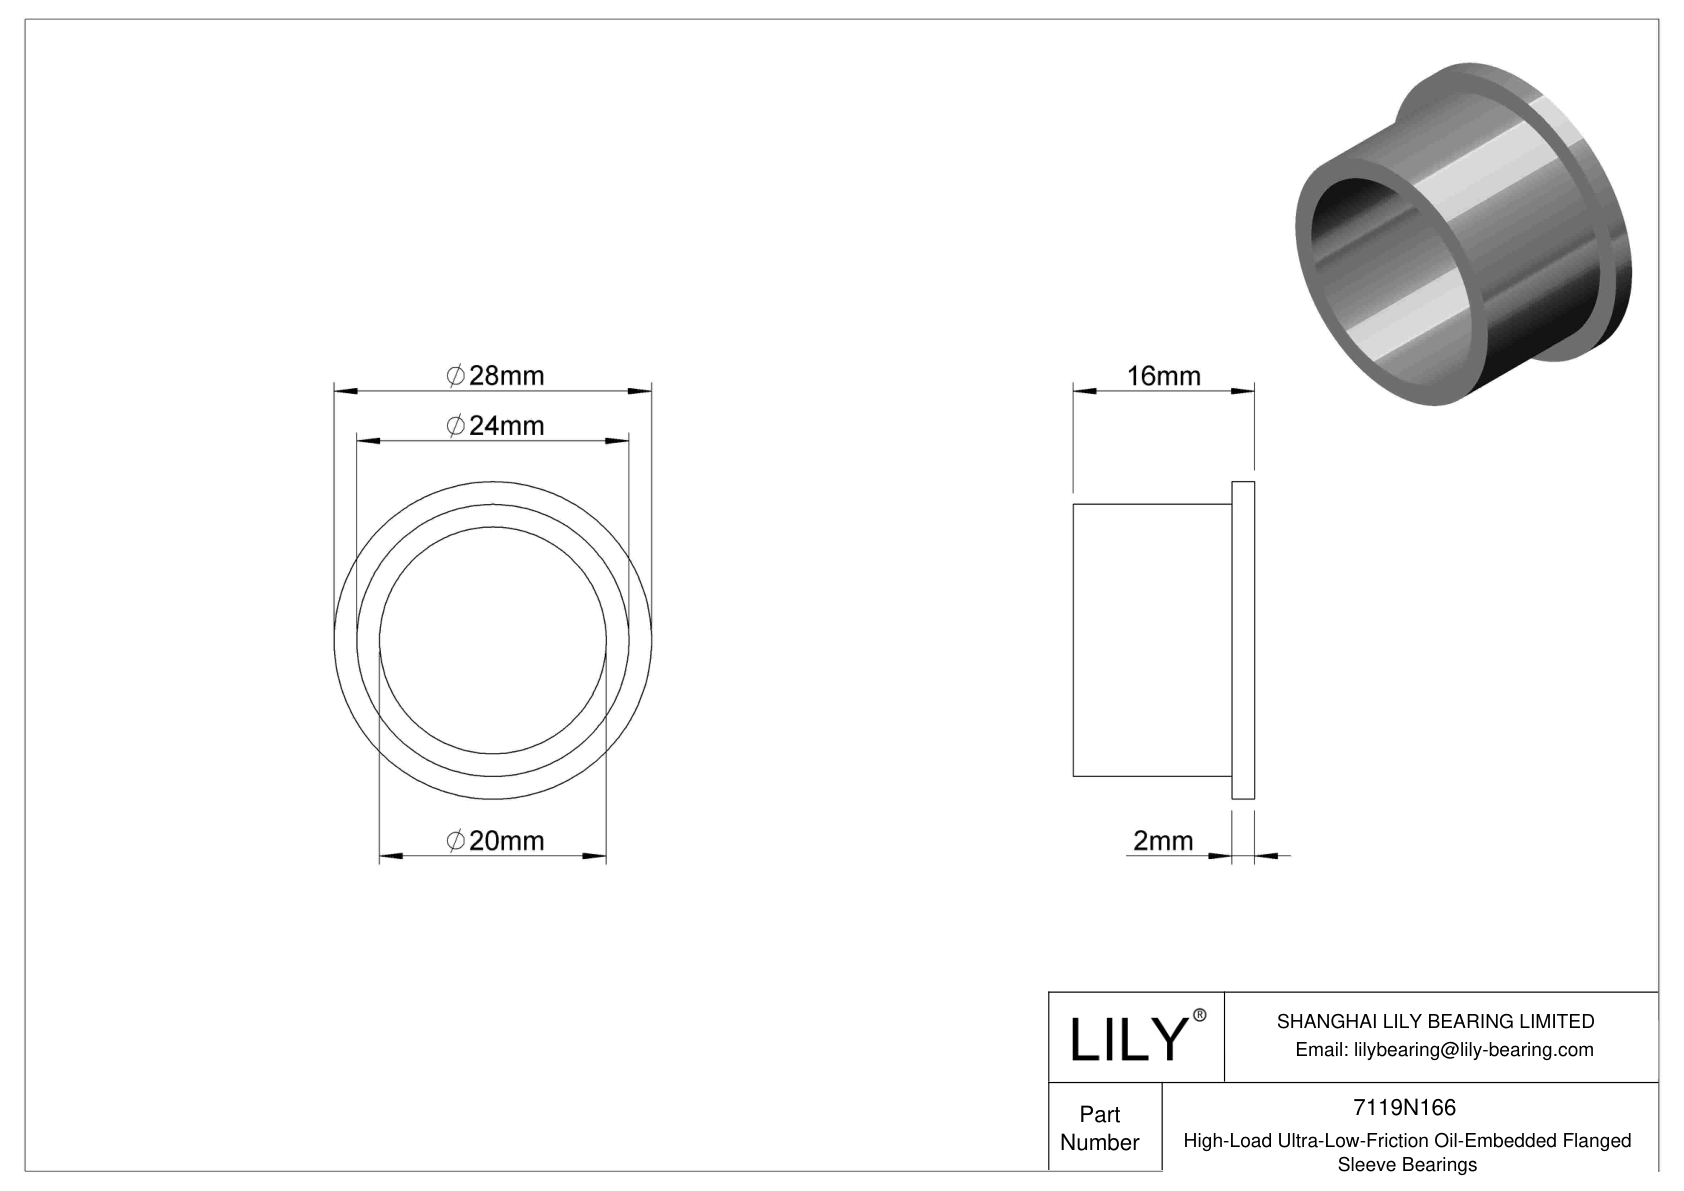 HBBJNBGG High-Load Ultra-Low-Friction Oil-Embedded Flanged Sleeve Bearings cad drawing